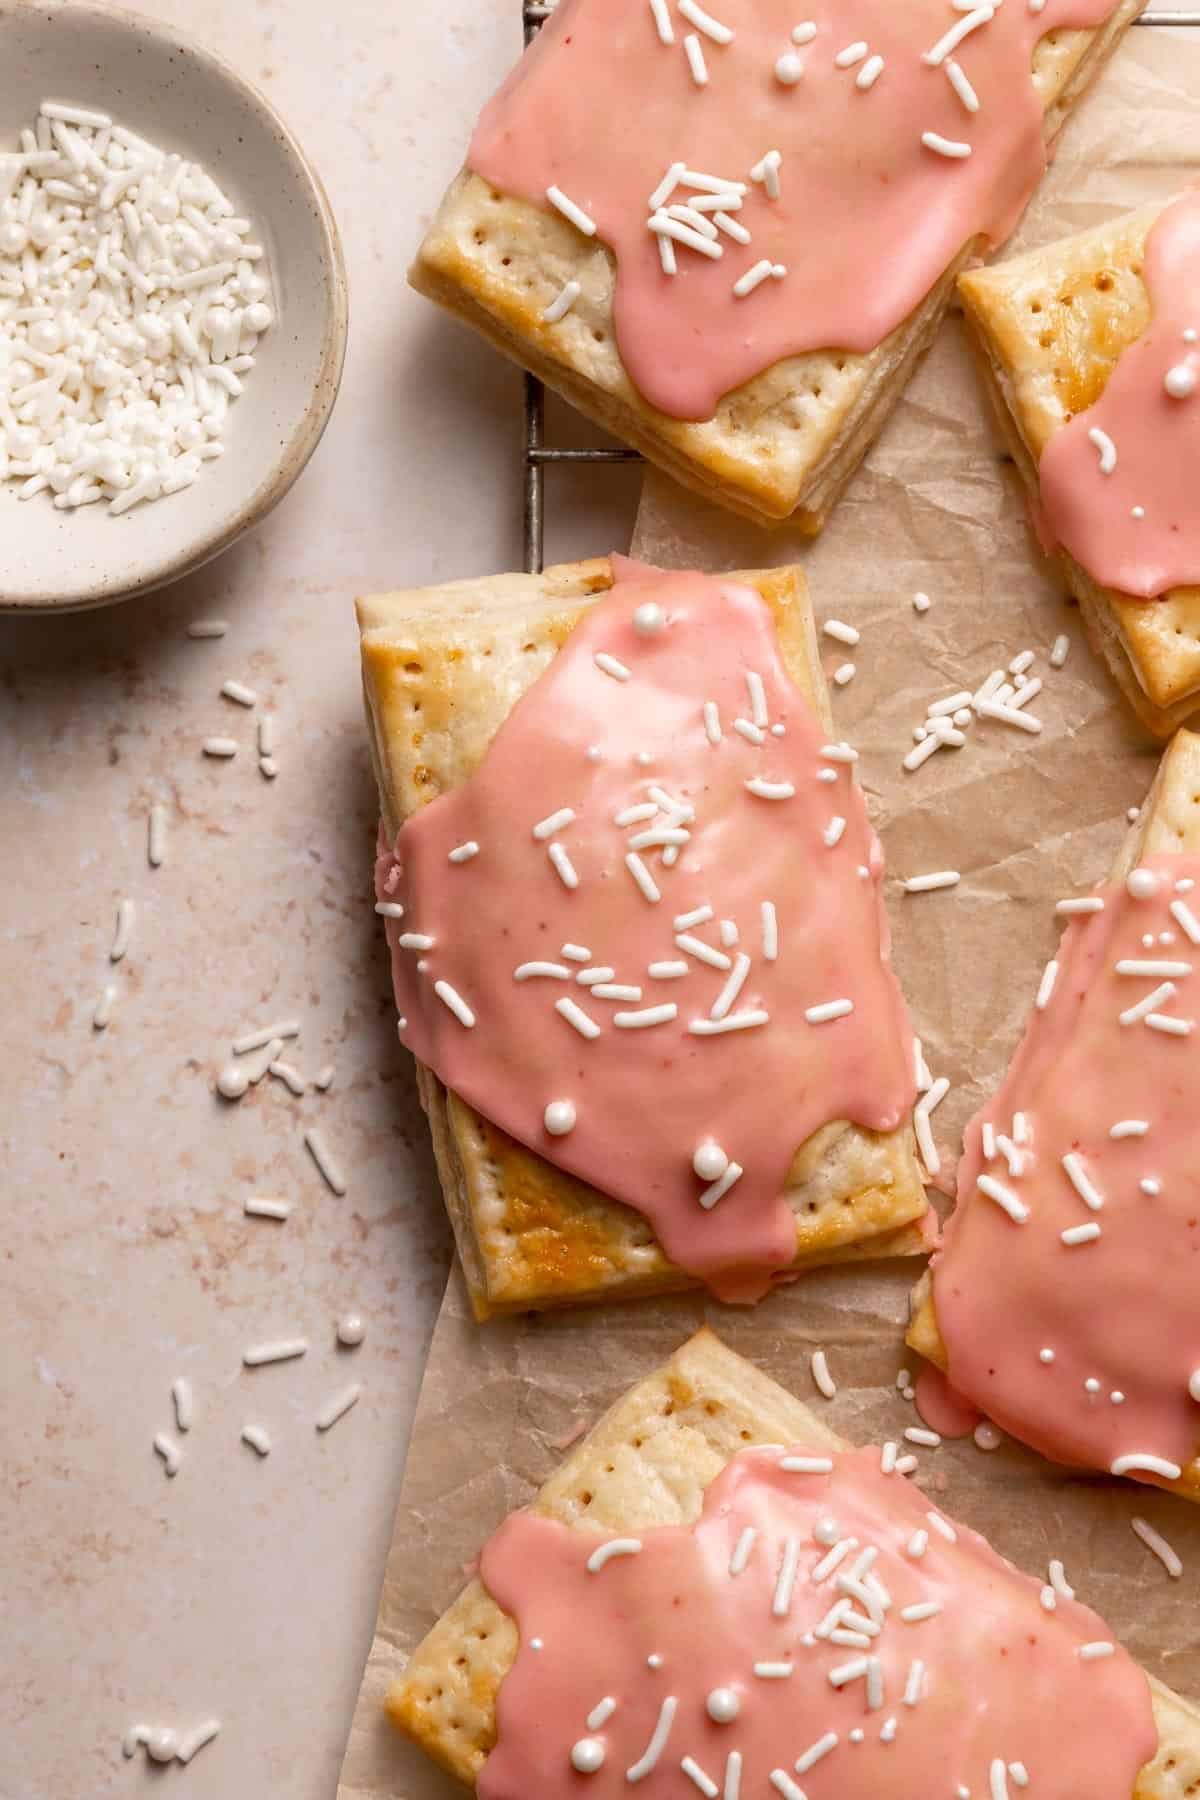 homemade pop tarts with pink glaze and white sprinkles.